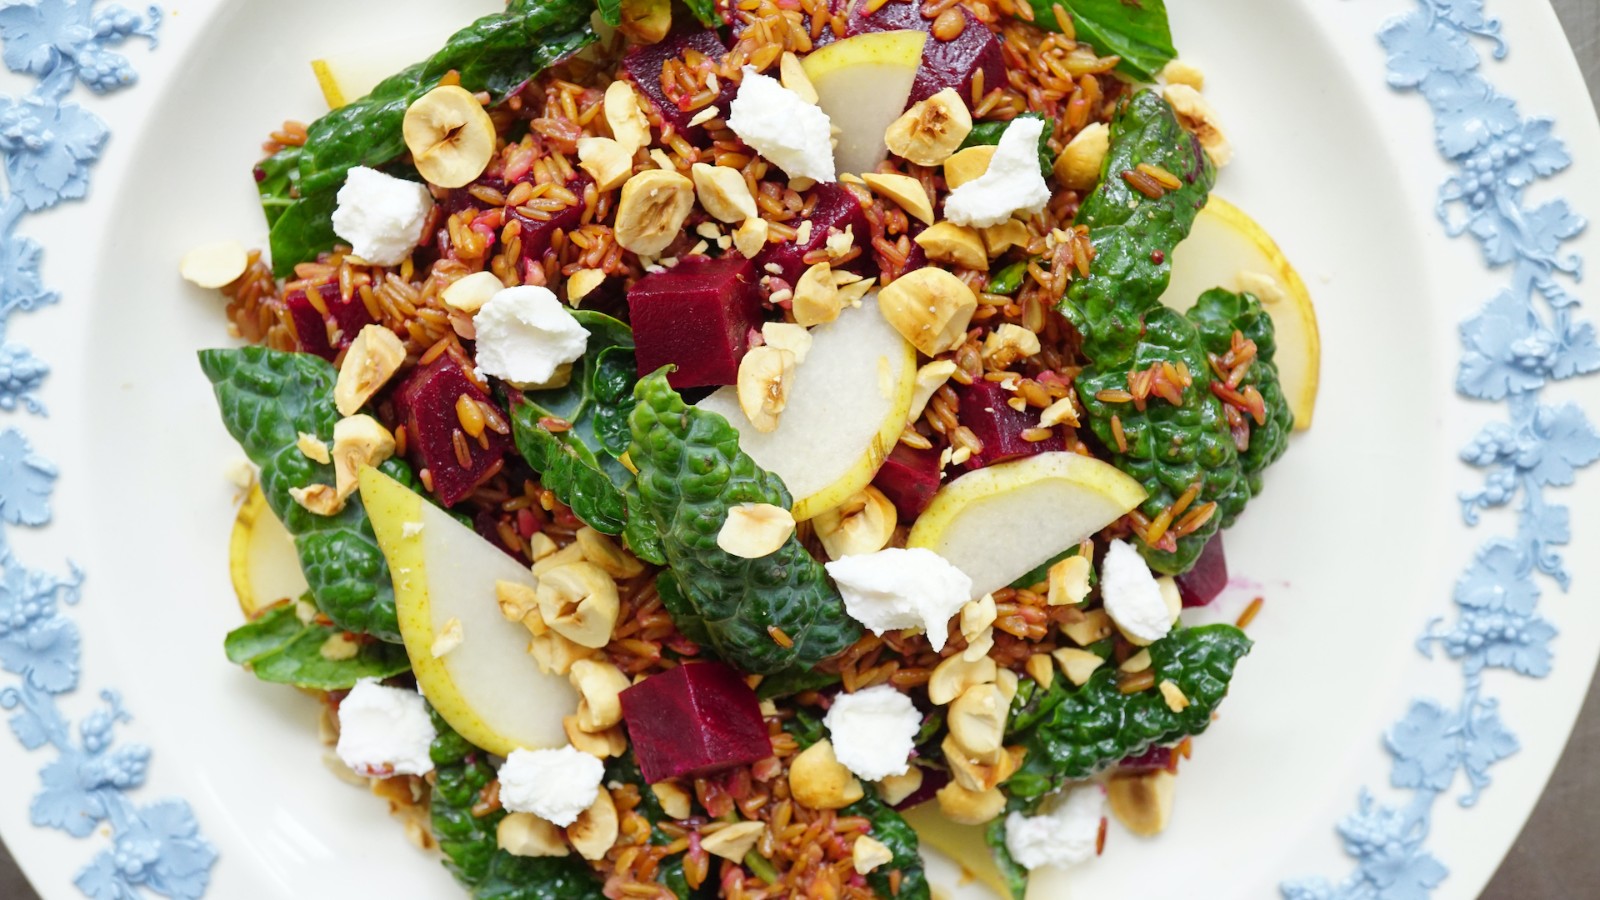 Image of Kernza® Beet, Kale, and Pear Salad